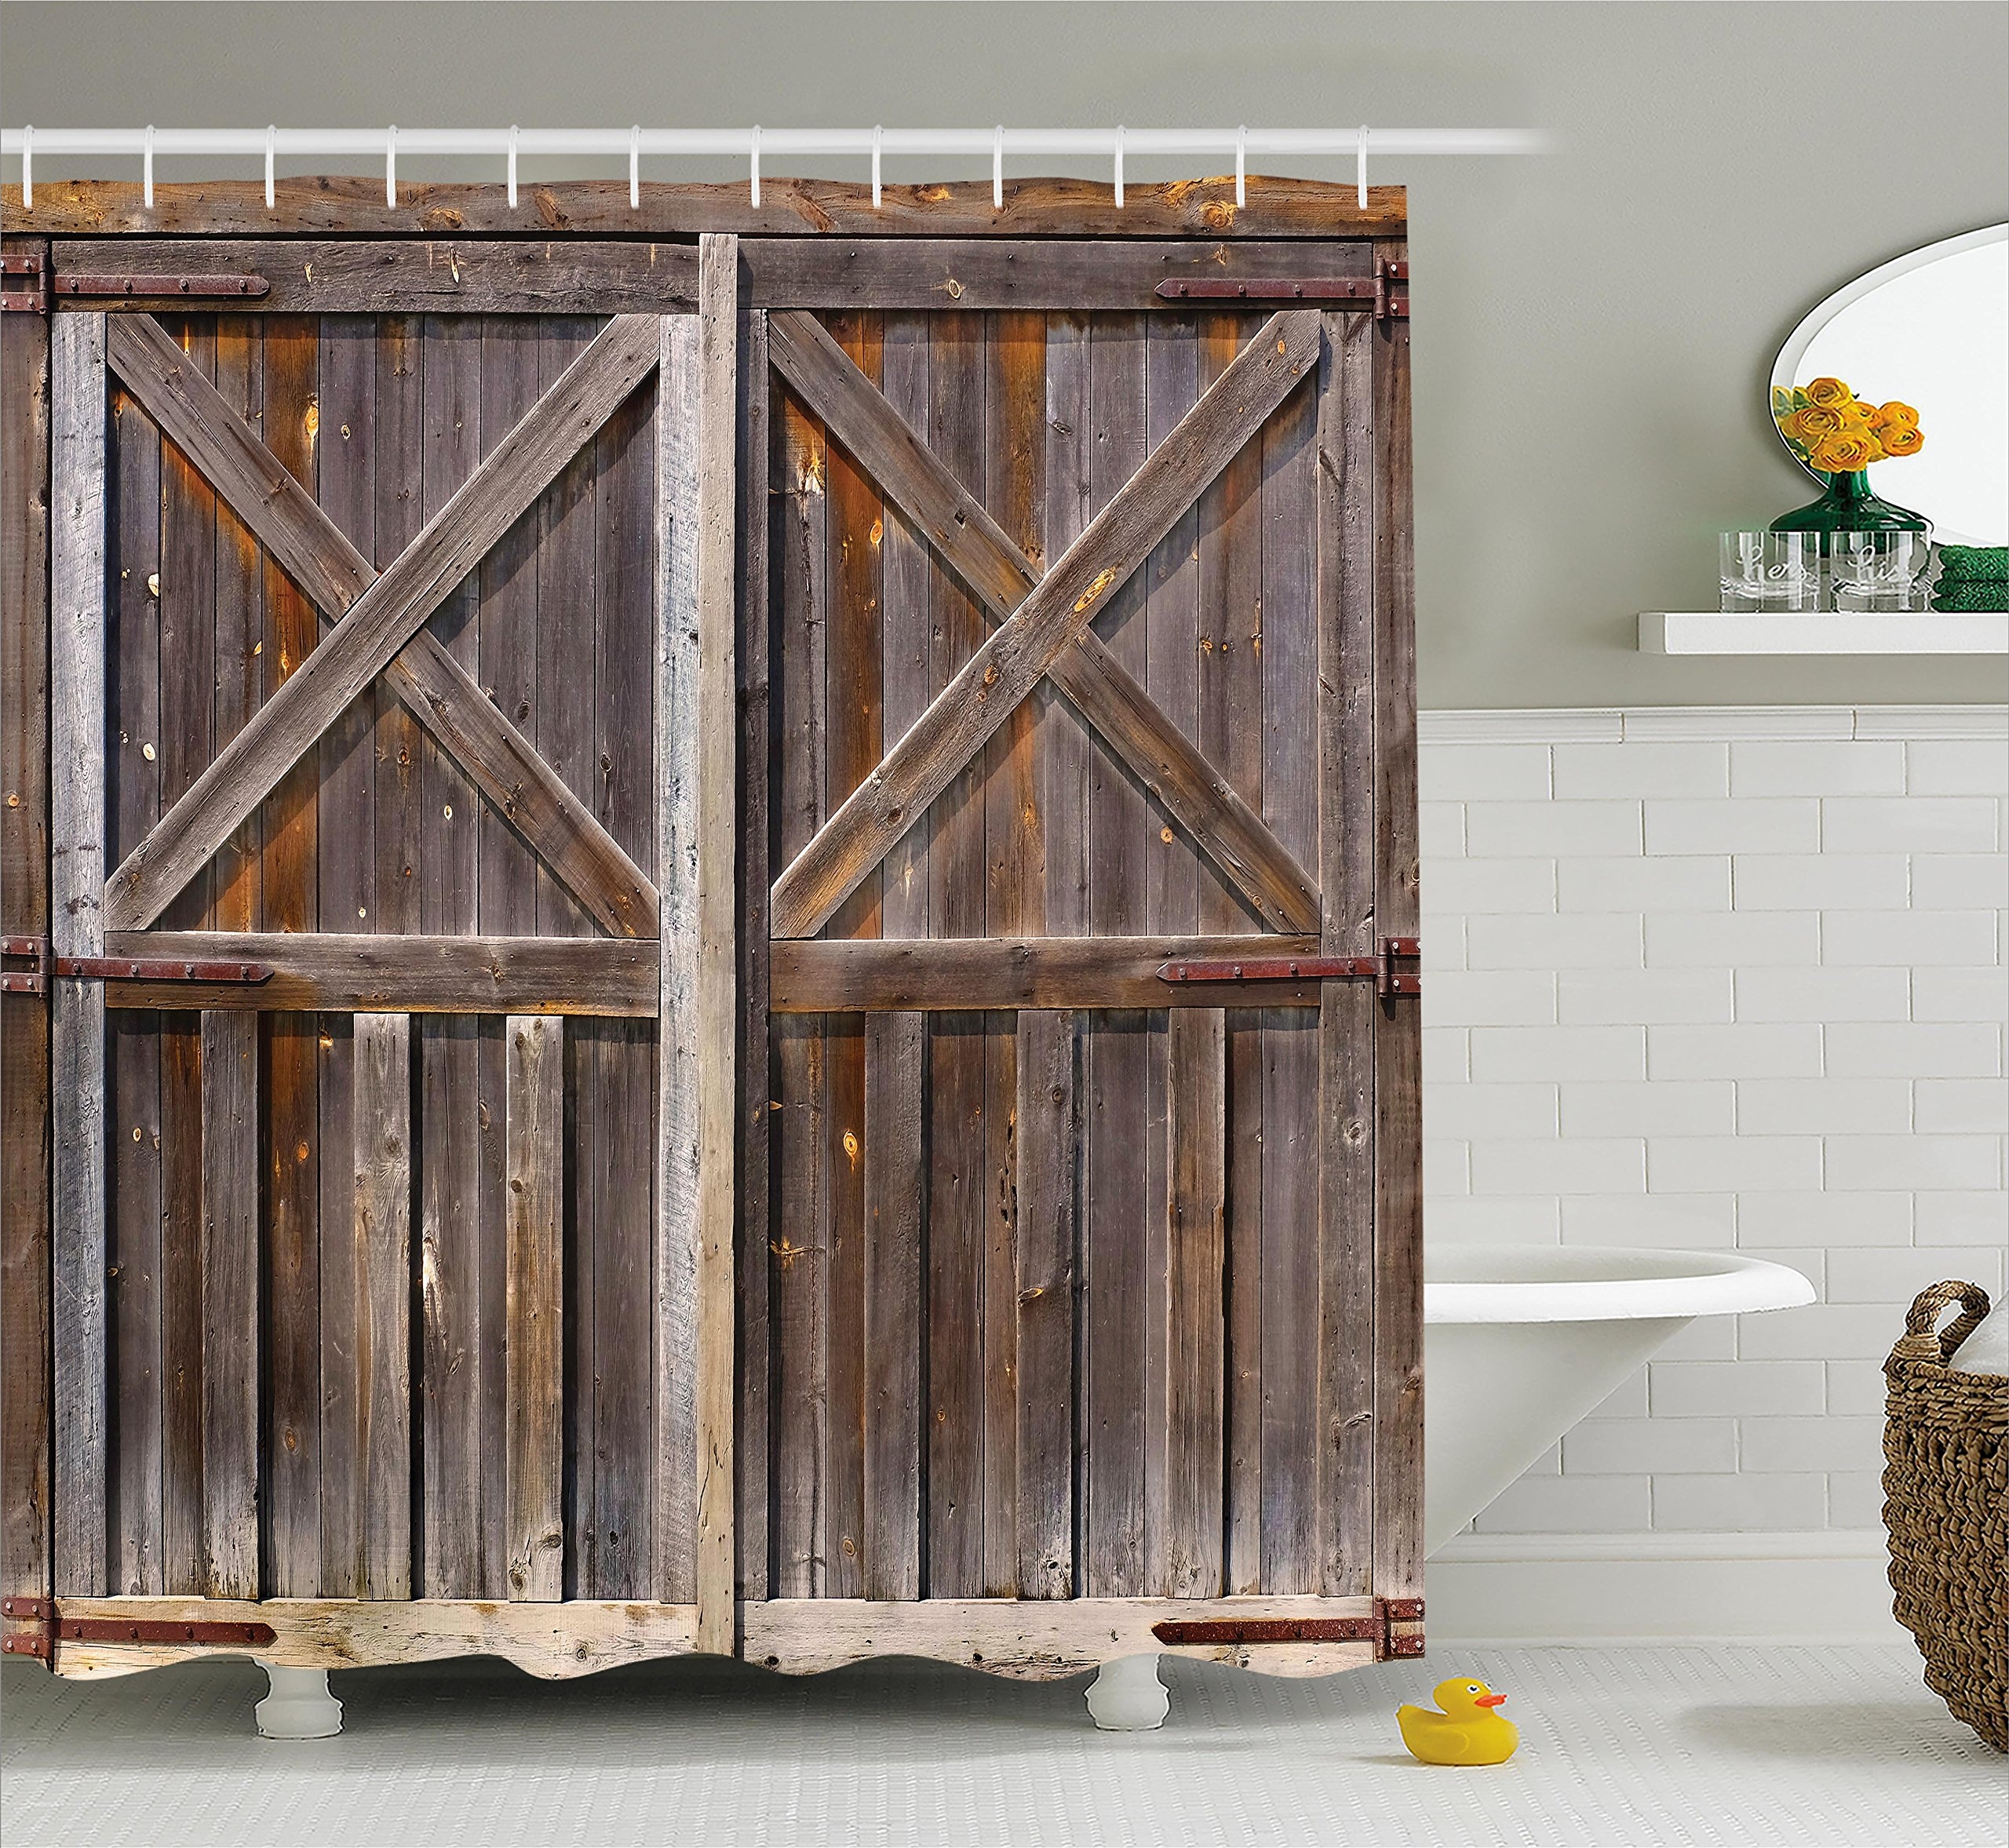 Details about   Coxila Barn Door Shower Curtain Rustic Wood Garage Wooden Farm House Countryside 